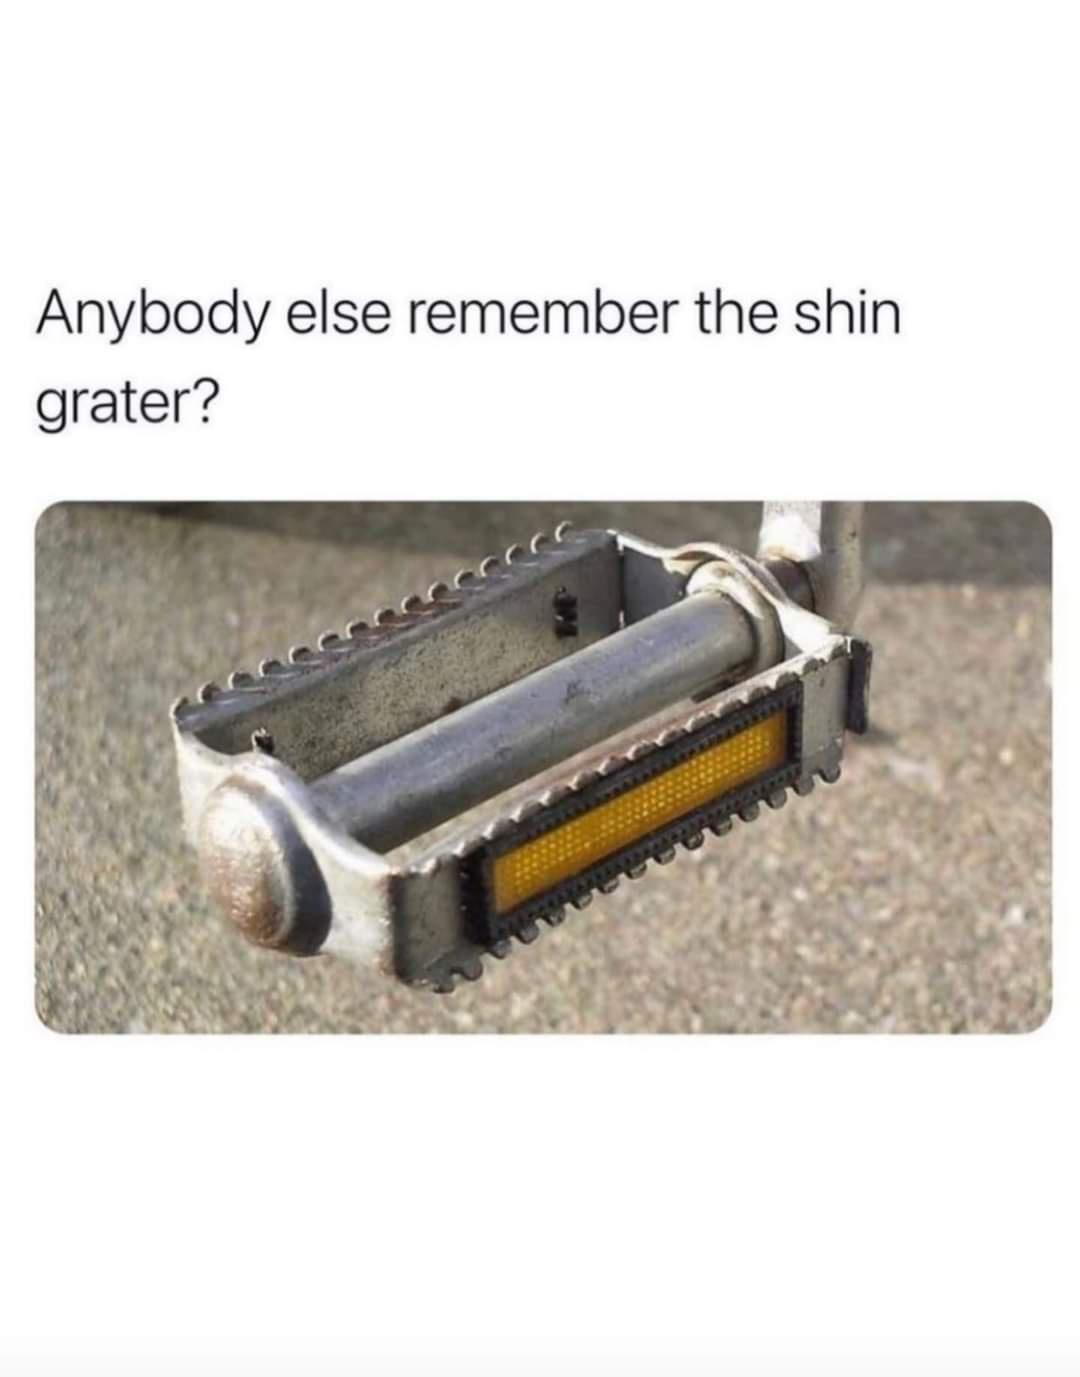 80s metal pedals - Anybody else remember the shin grater?